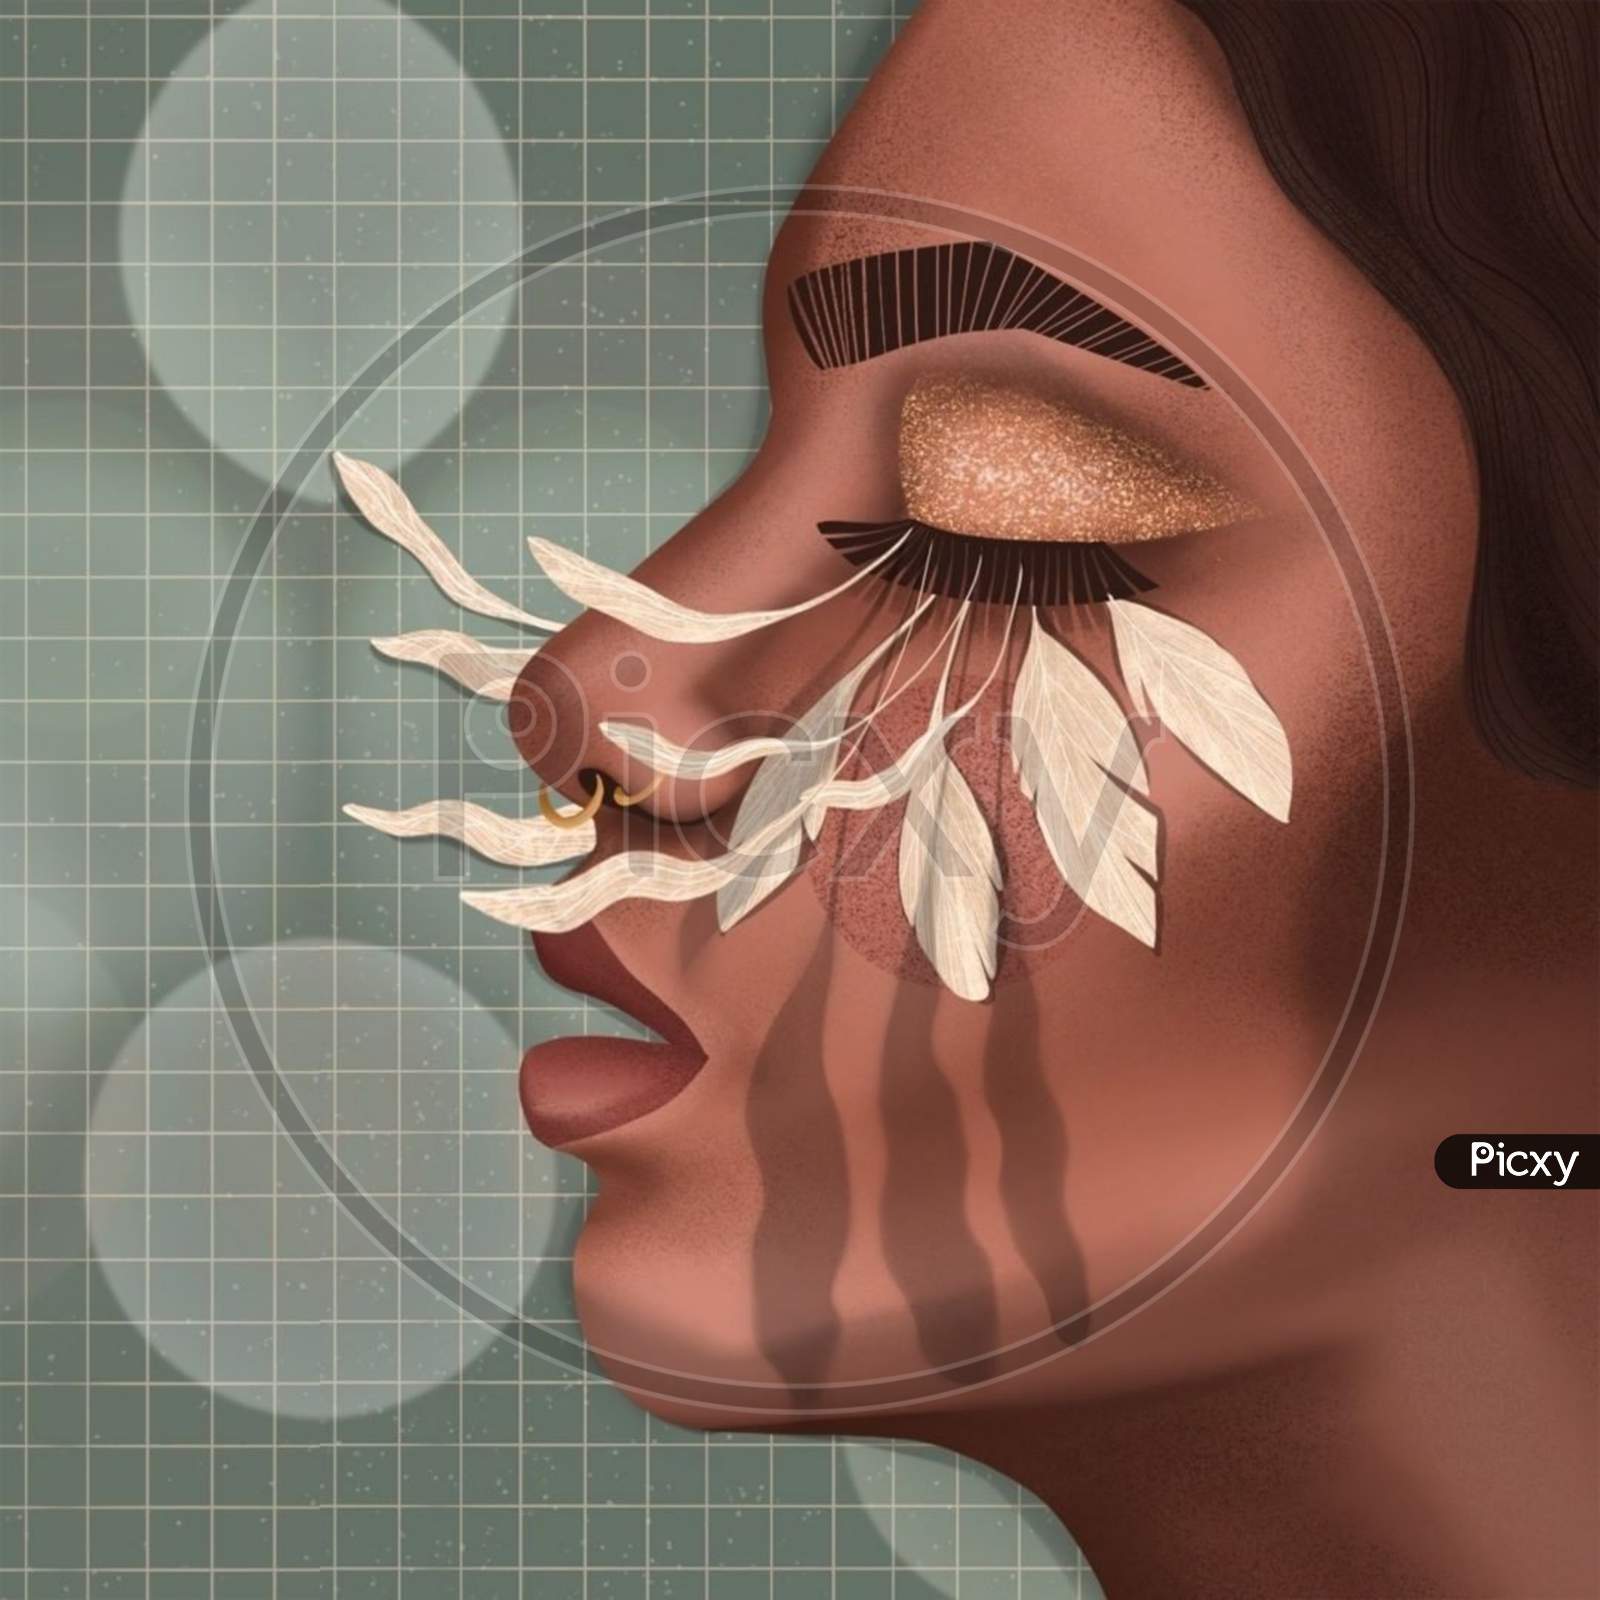 This is the illustration of a woman's eyelash